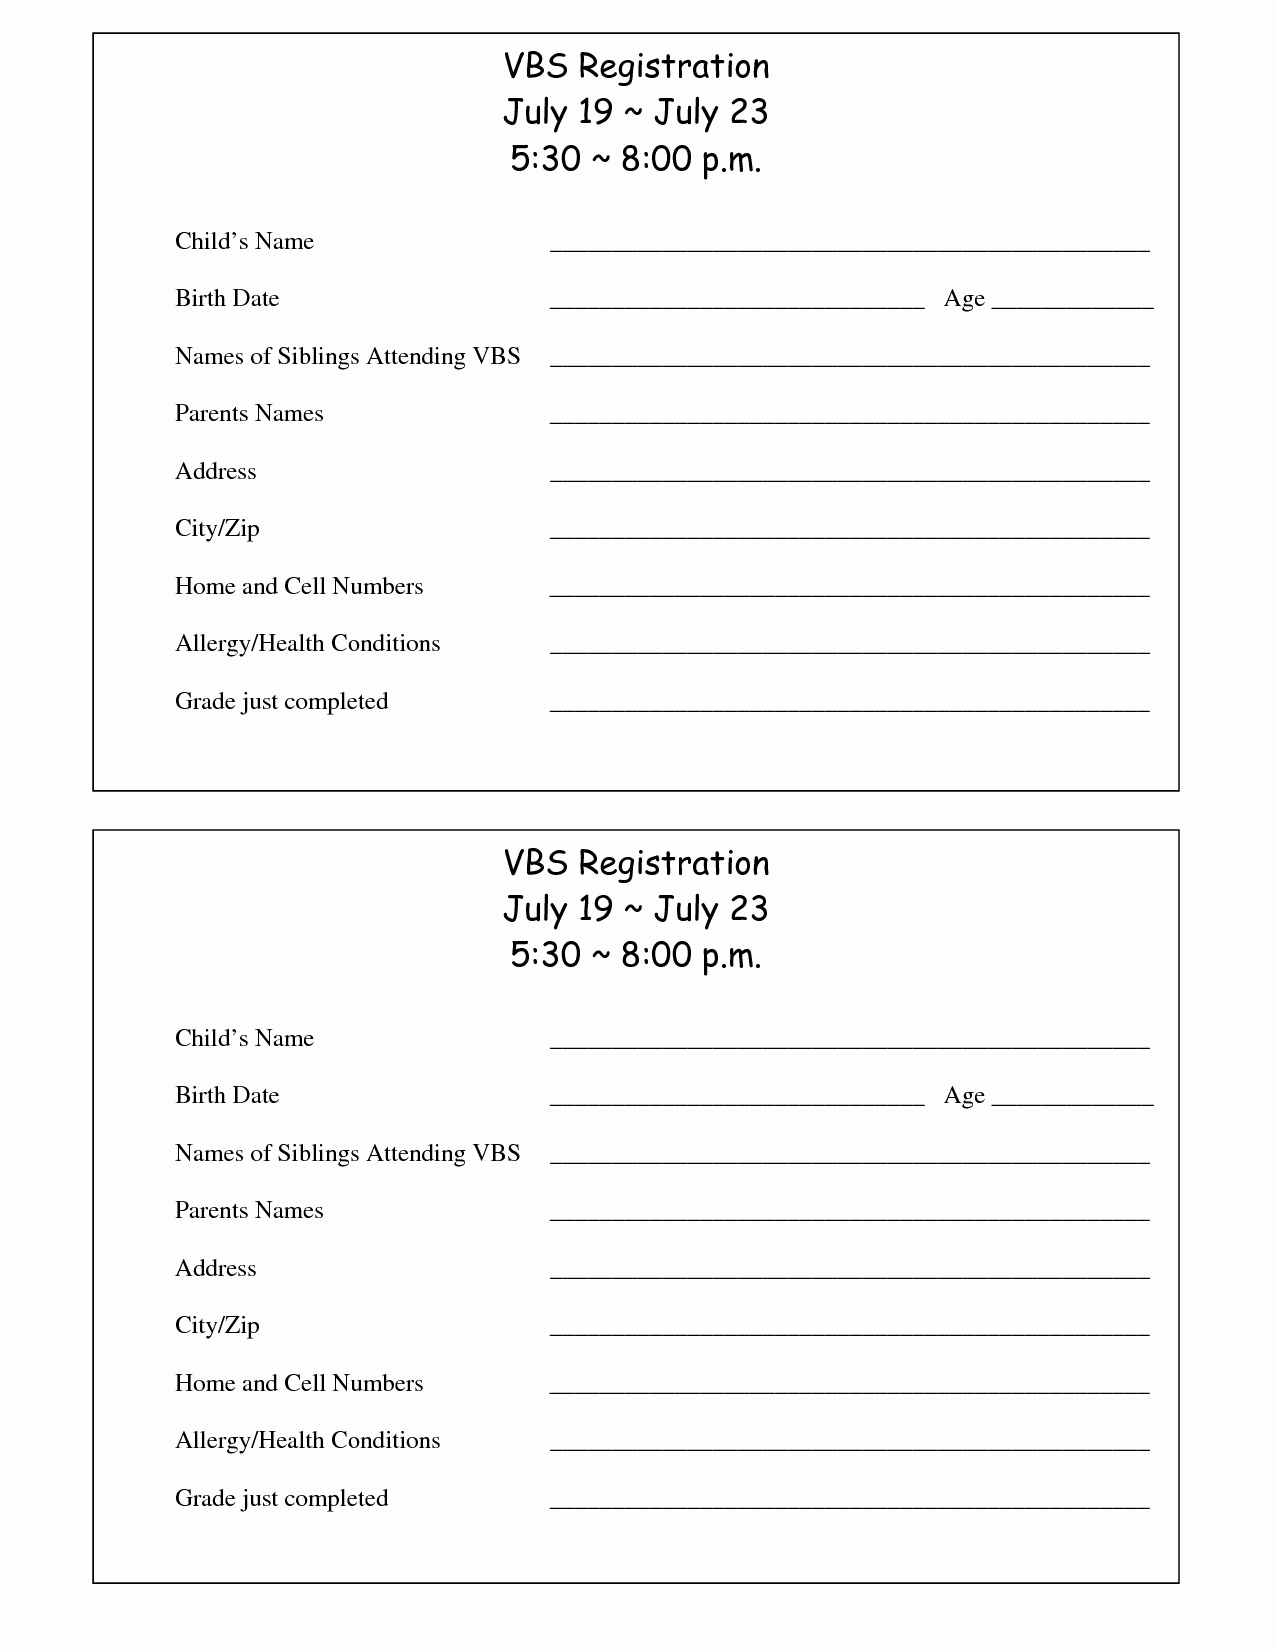 Template for Registration form Beautiful Printable Vbs Registration form Template